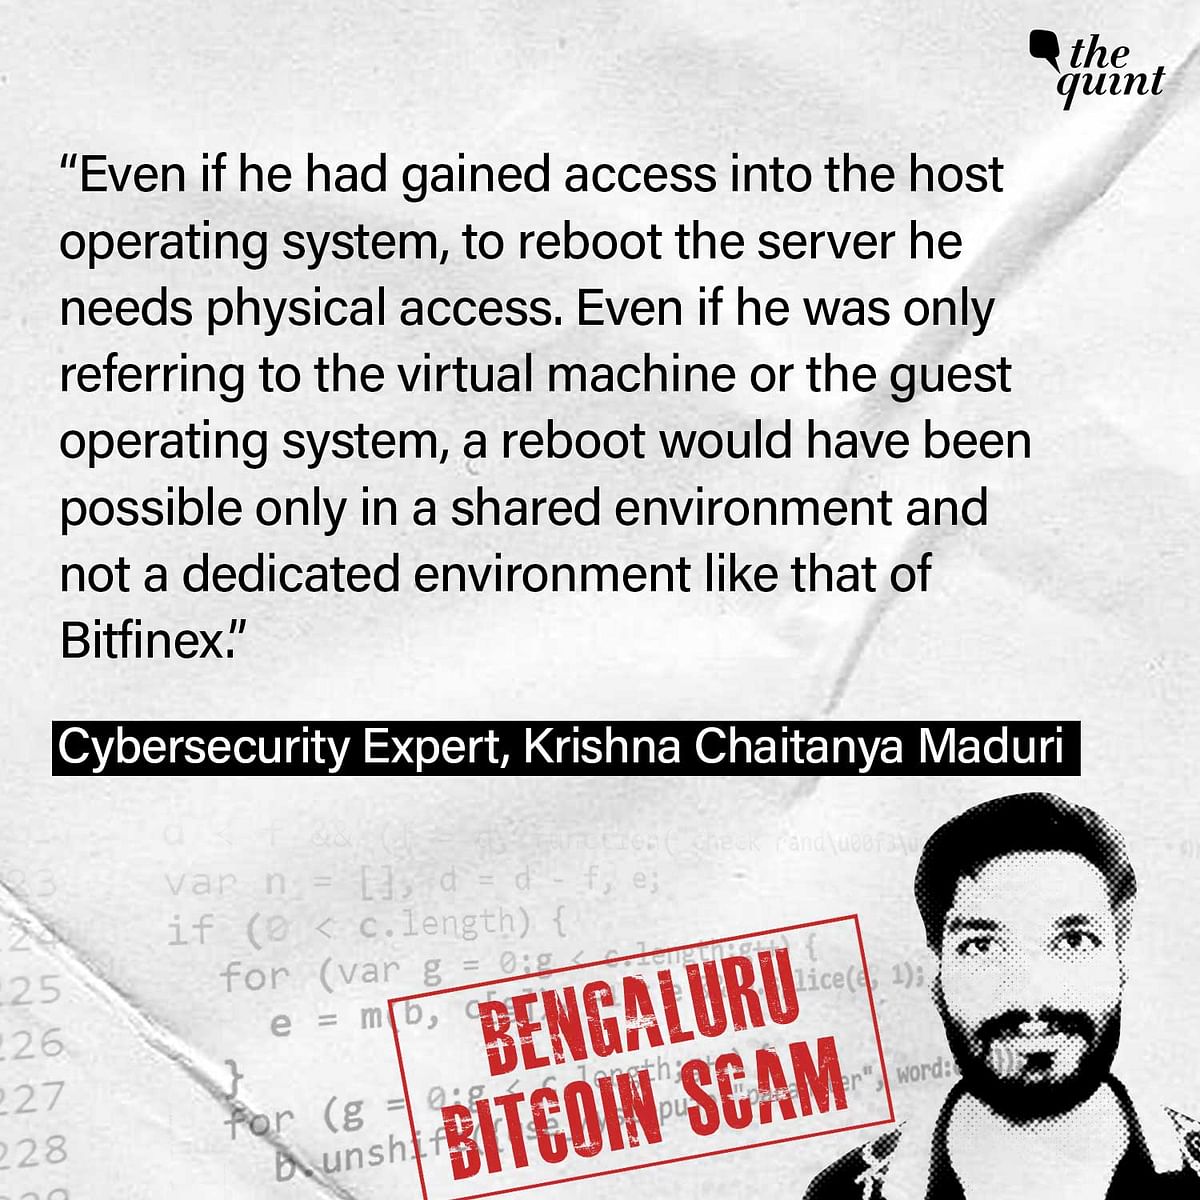 Srikrishna Ramesh obscured his bitcoin hacking path even as Bengaluru's Central Crime Branch looked the other way.